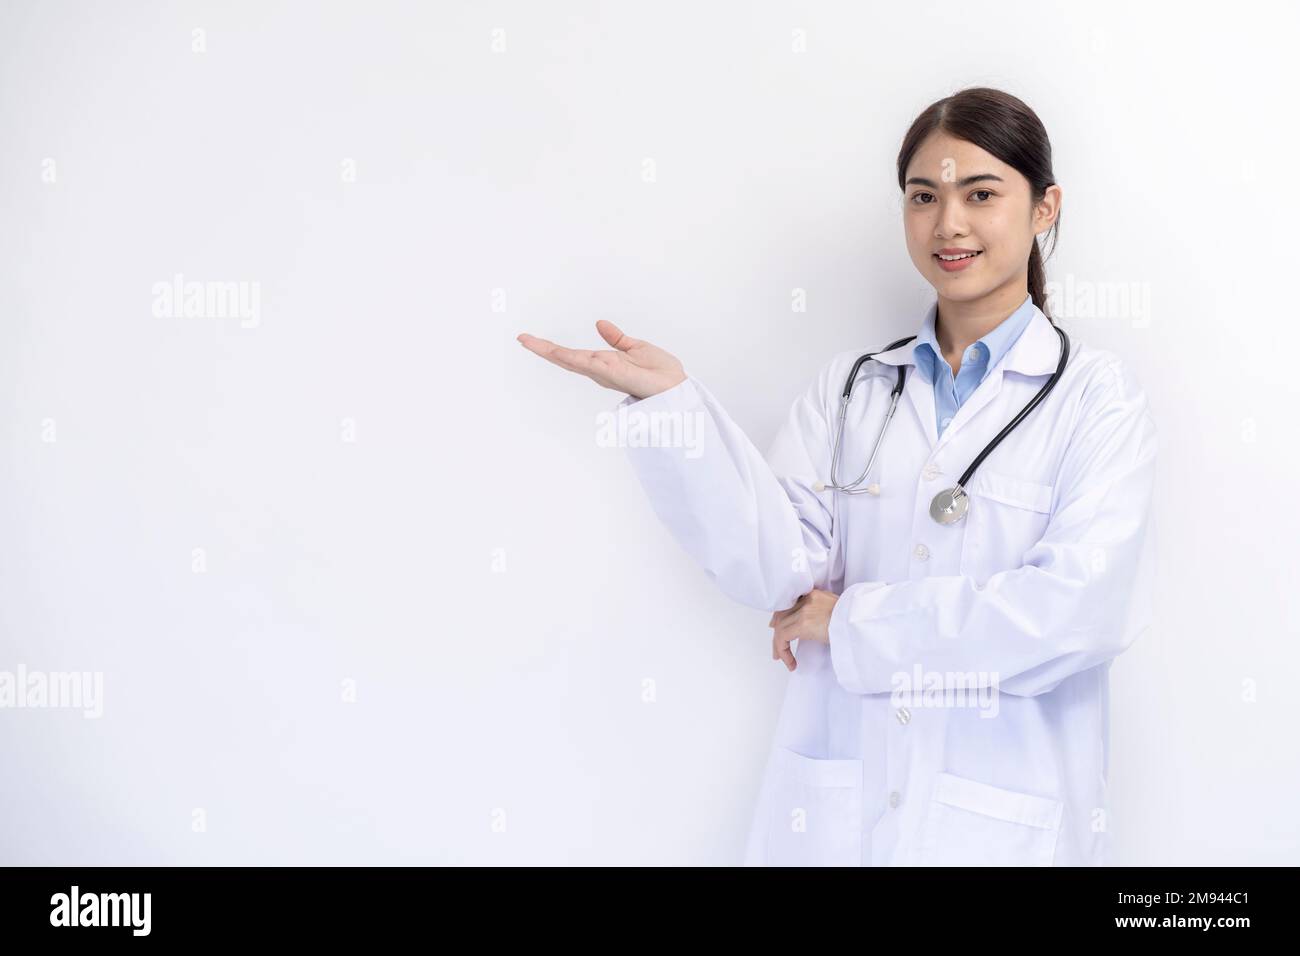 Portrait of female doctor in medical coat standing on isolated white background Stock Photo